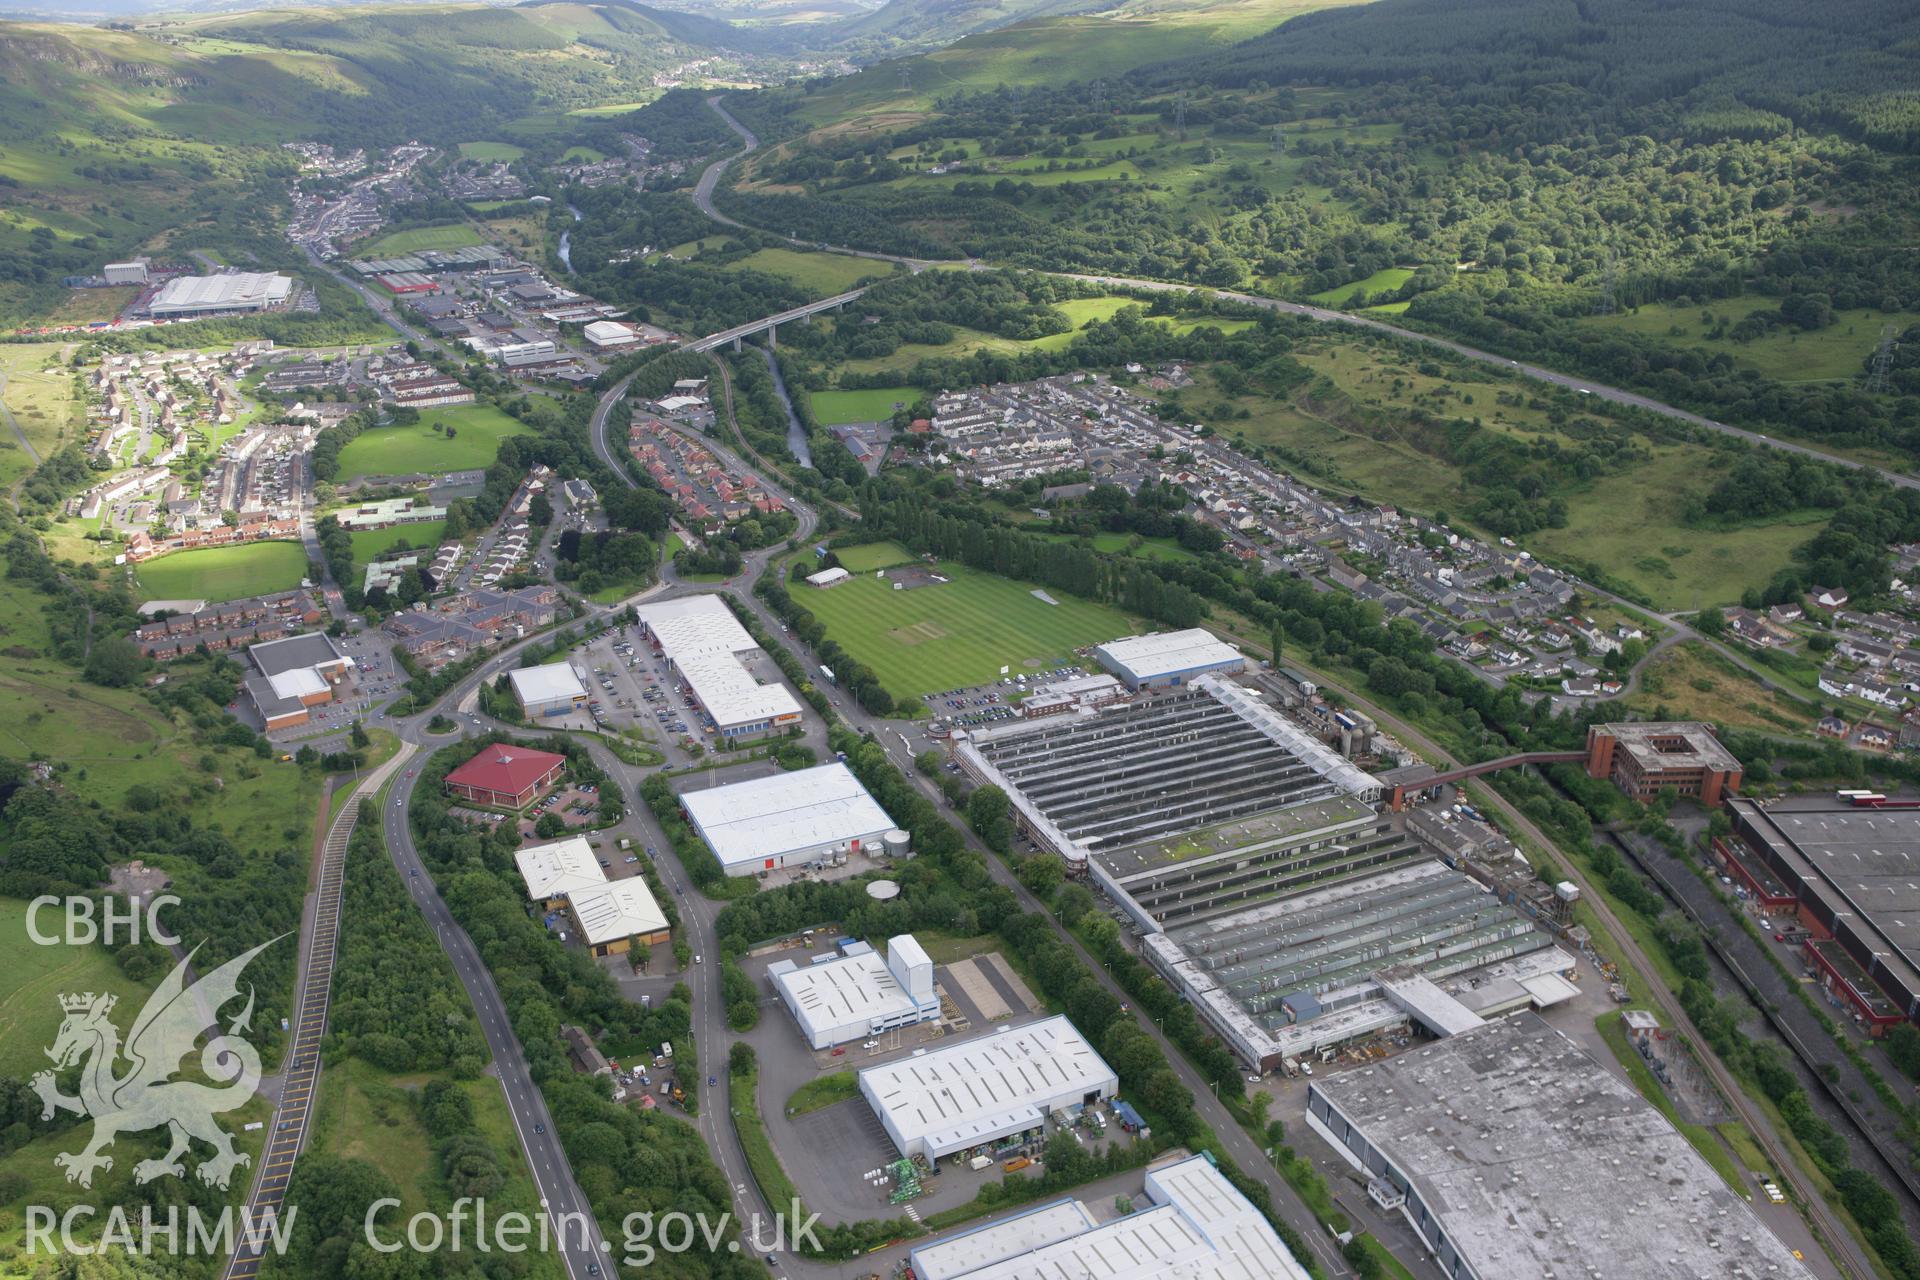 RCAHMW colour oblique aerial photograph of Hoover Factory, Merthyr Tydfil. Taken on 30 July 2007 by Toby Driver